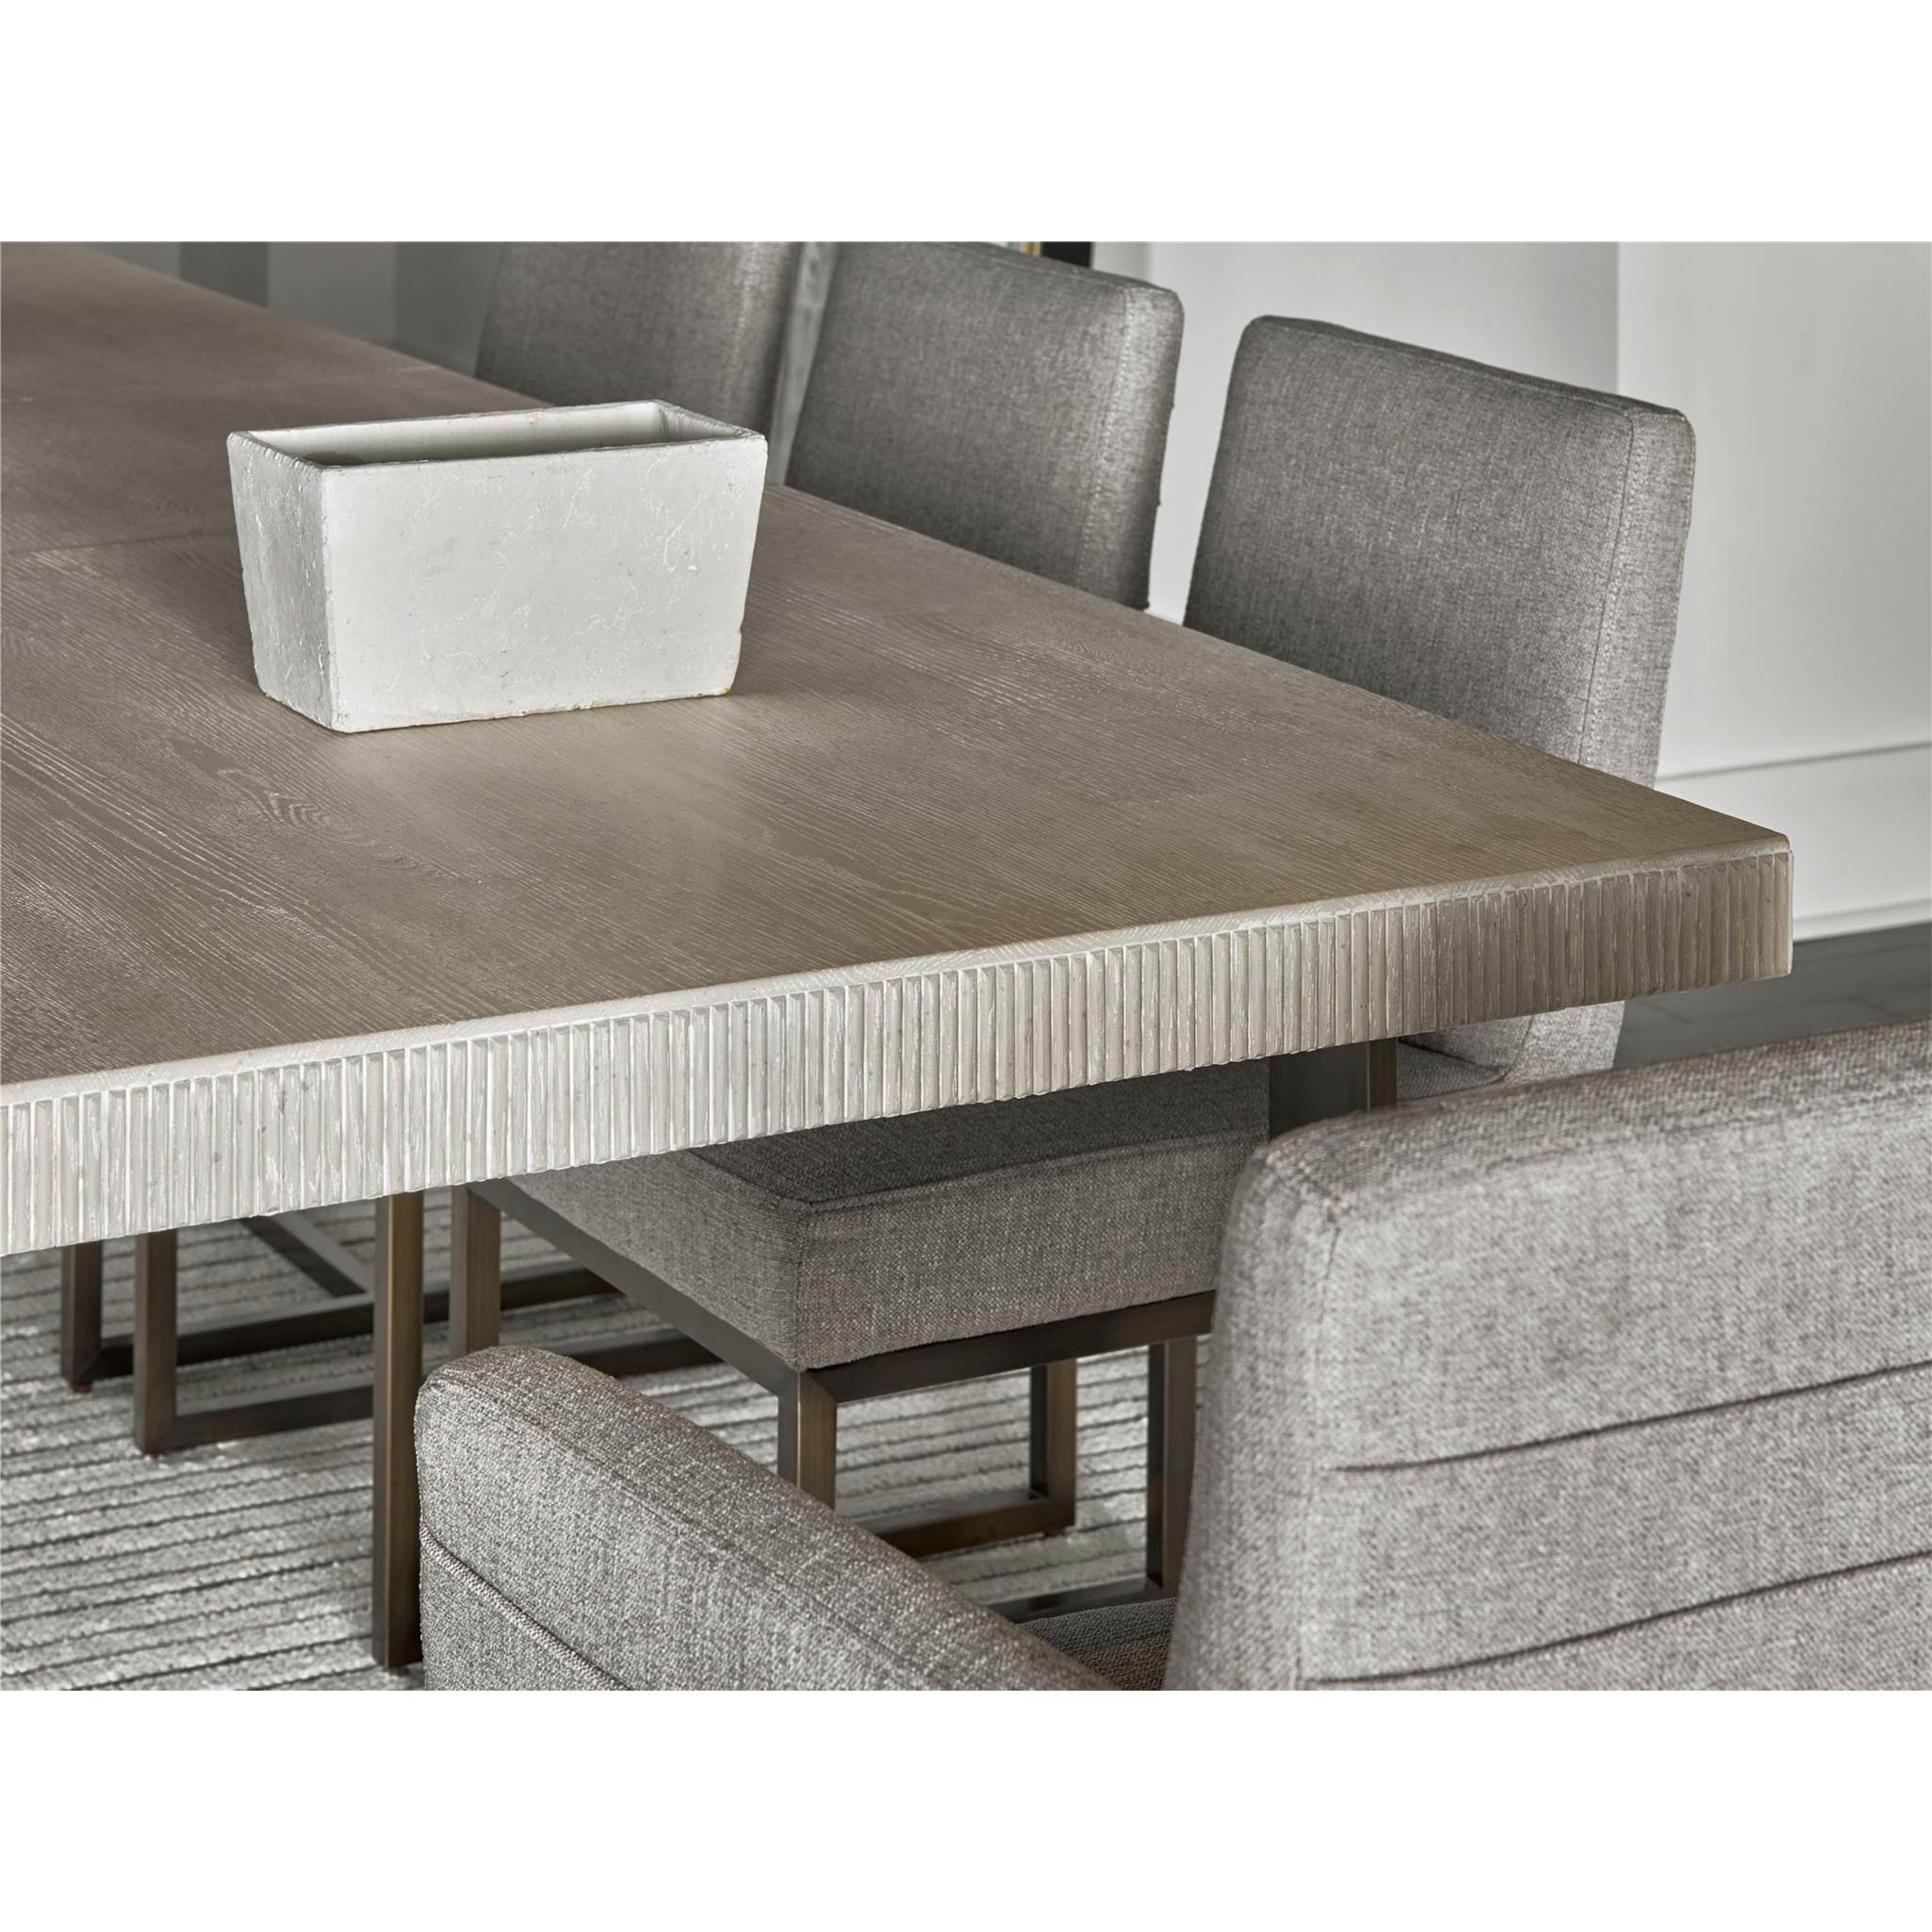 John Modern Classic Ivory Wood Top Bronze Metal Extendable Dining Table - Image 2